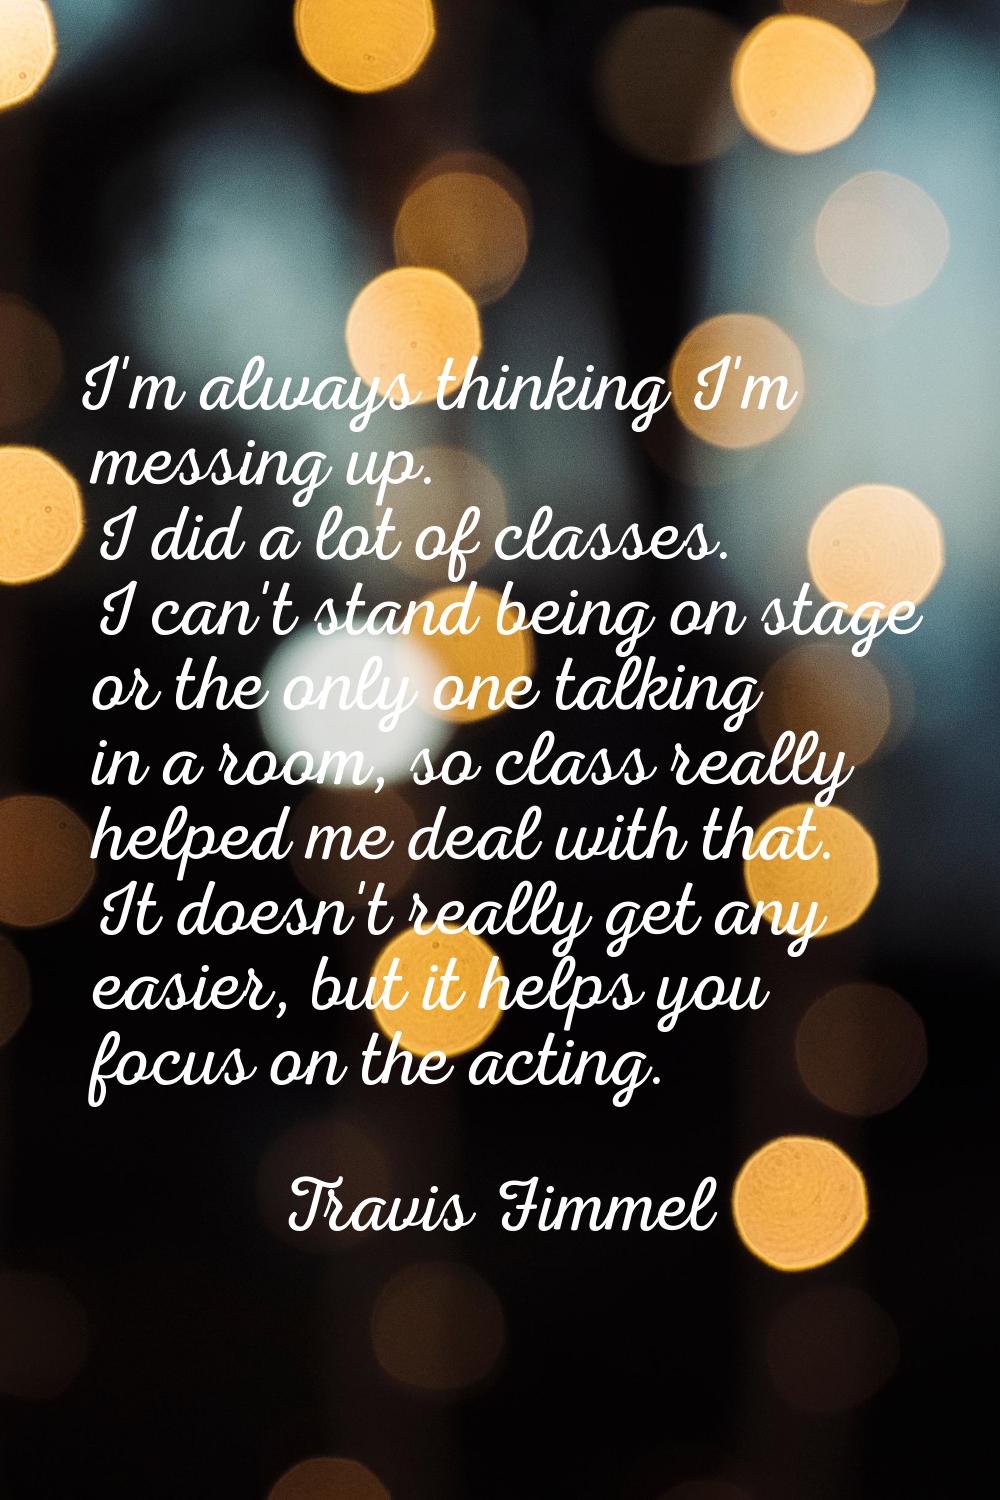 I'm always thinking I'm messing up. I did a lot of classes. I can't stand being on stage or the onl